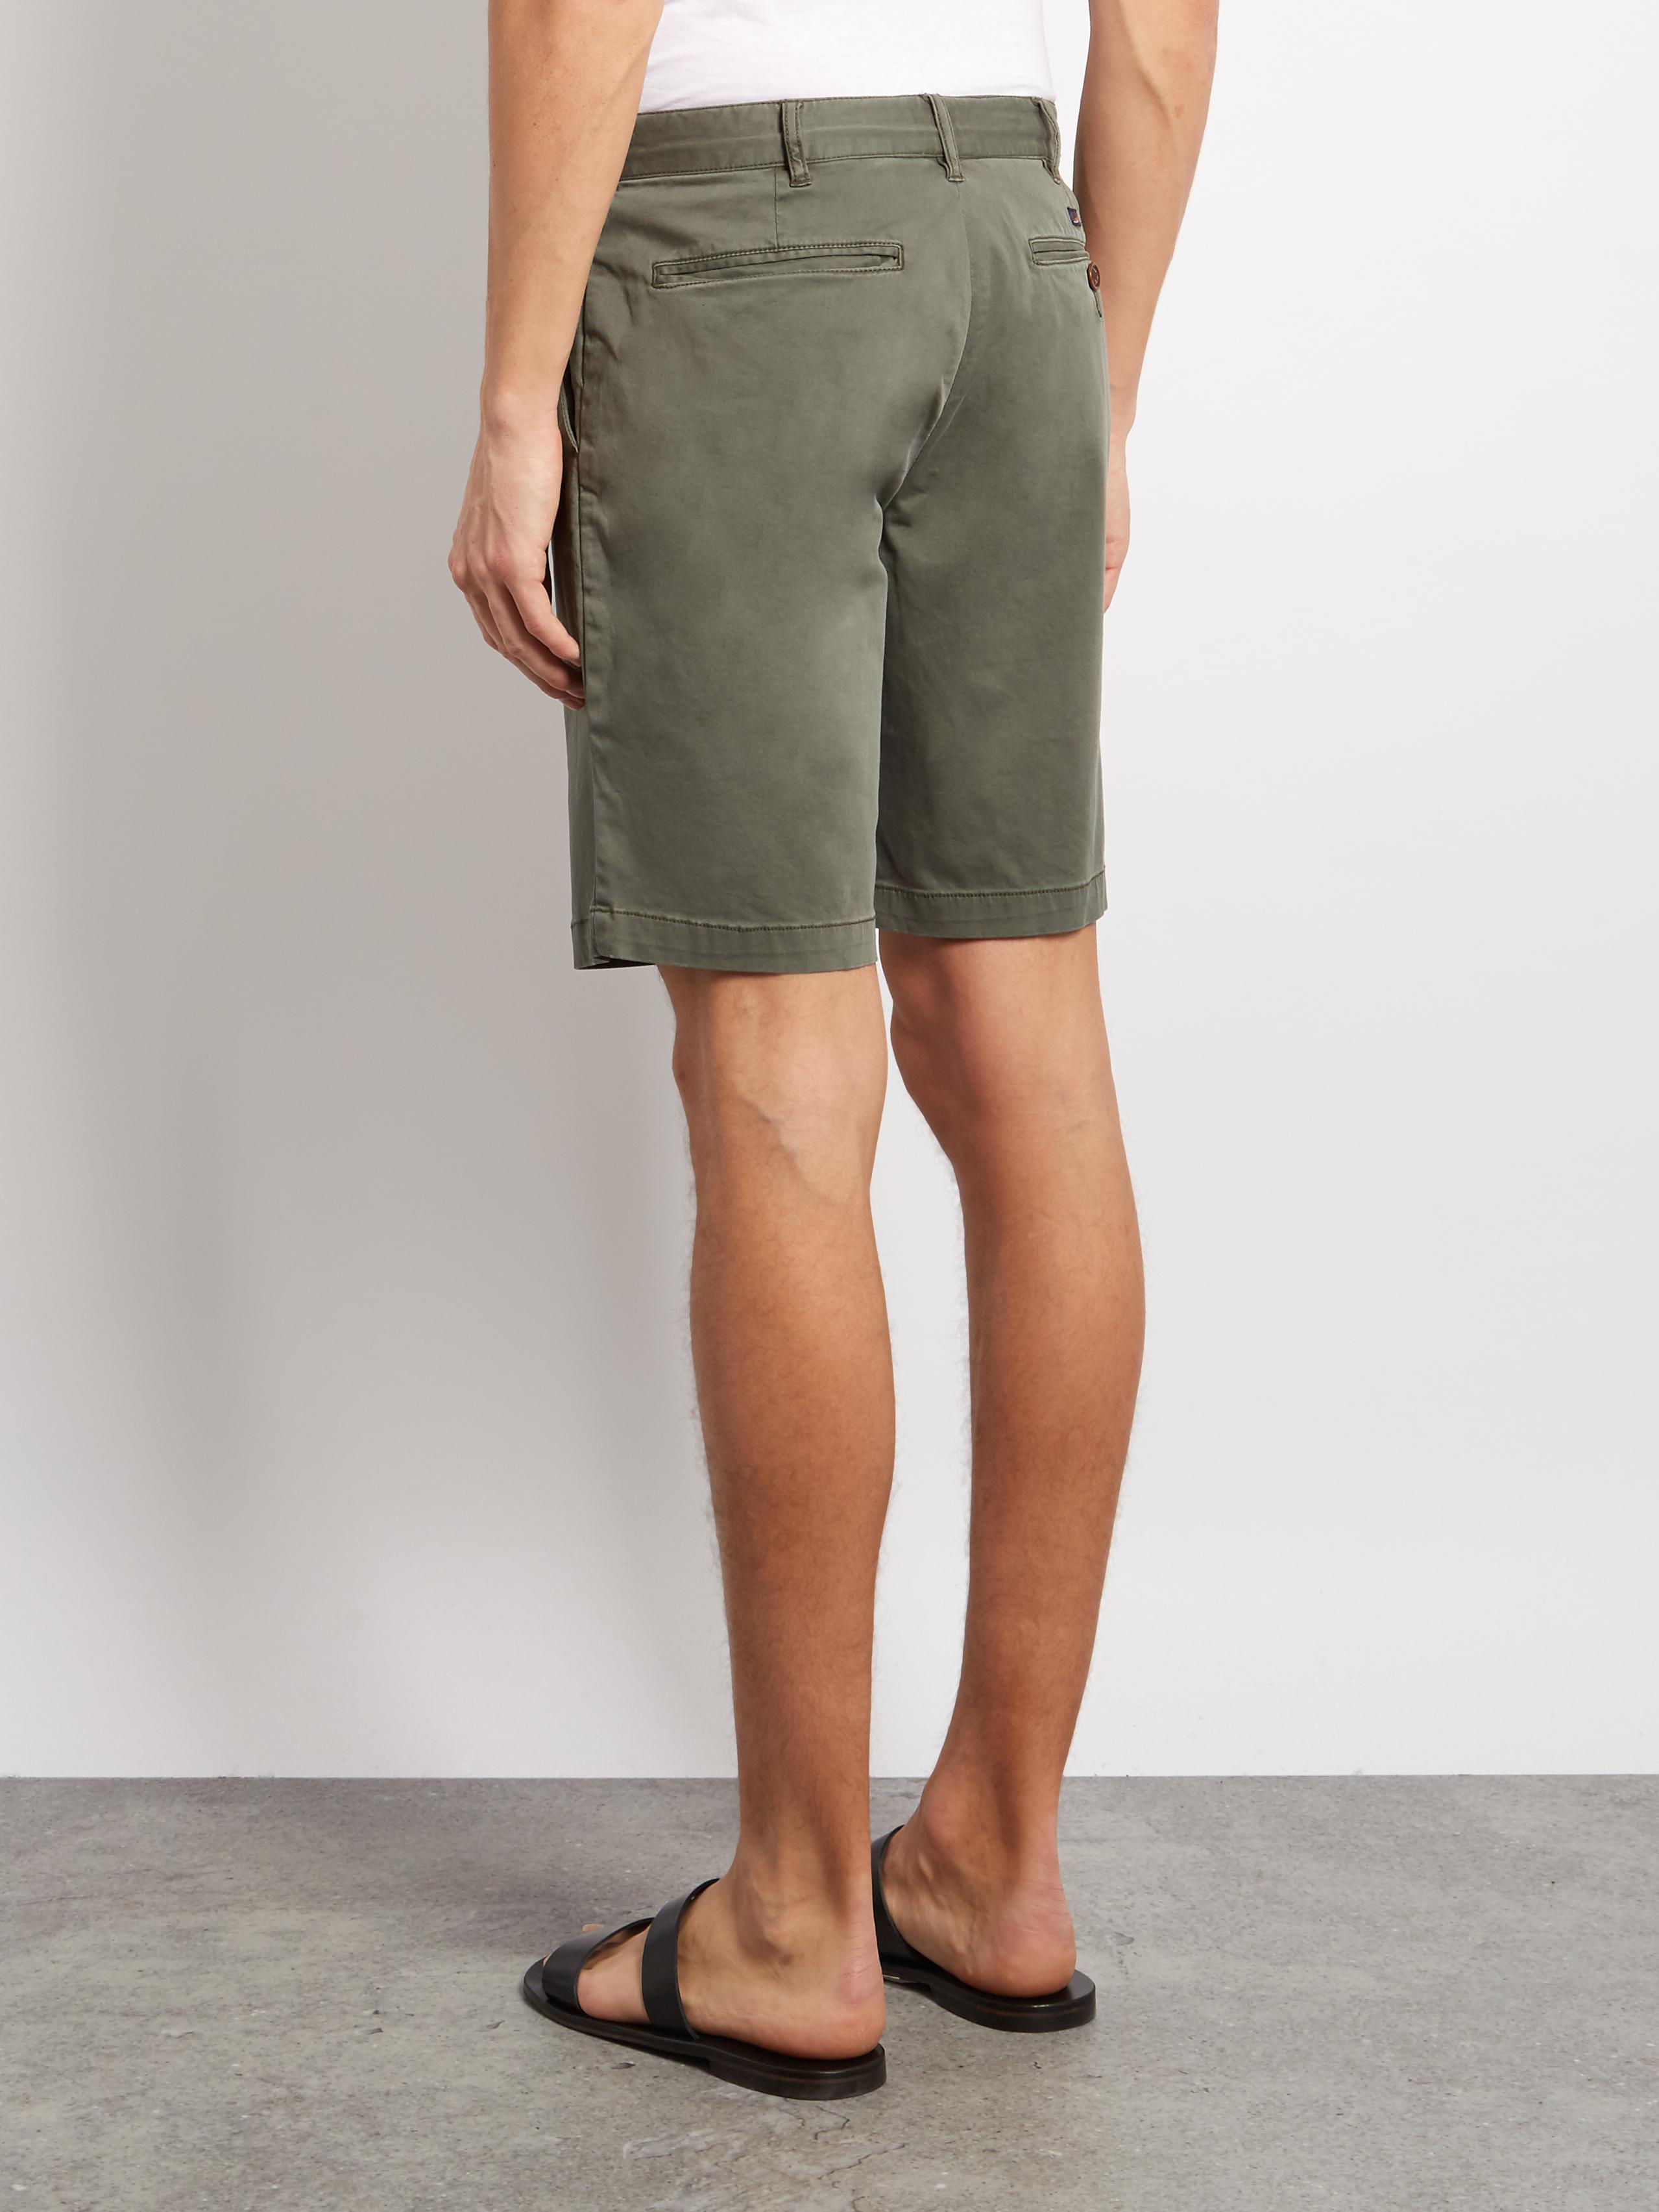 Lyst - Faherty Brand Slim-fit Cotton-blend Chino Shorts in Gray for Men